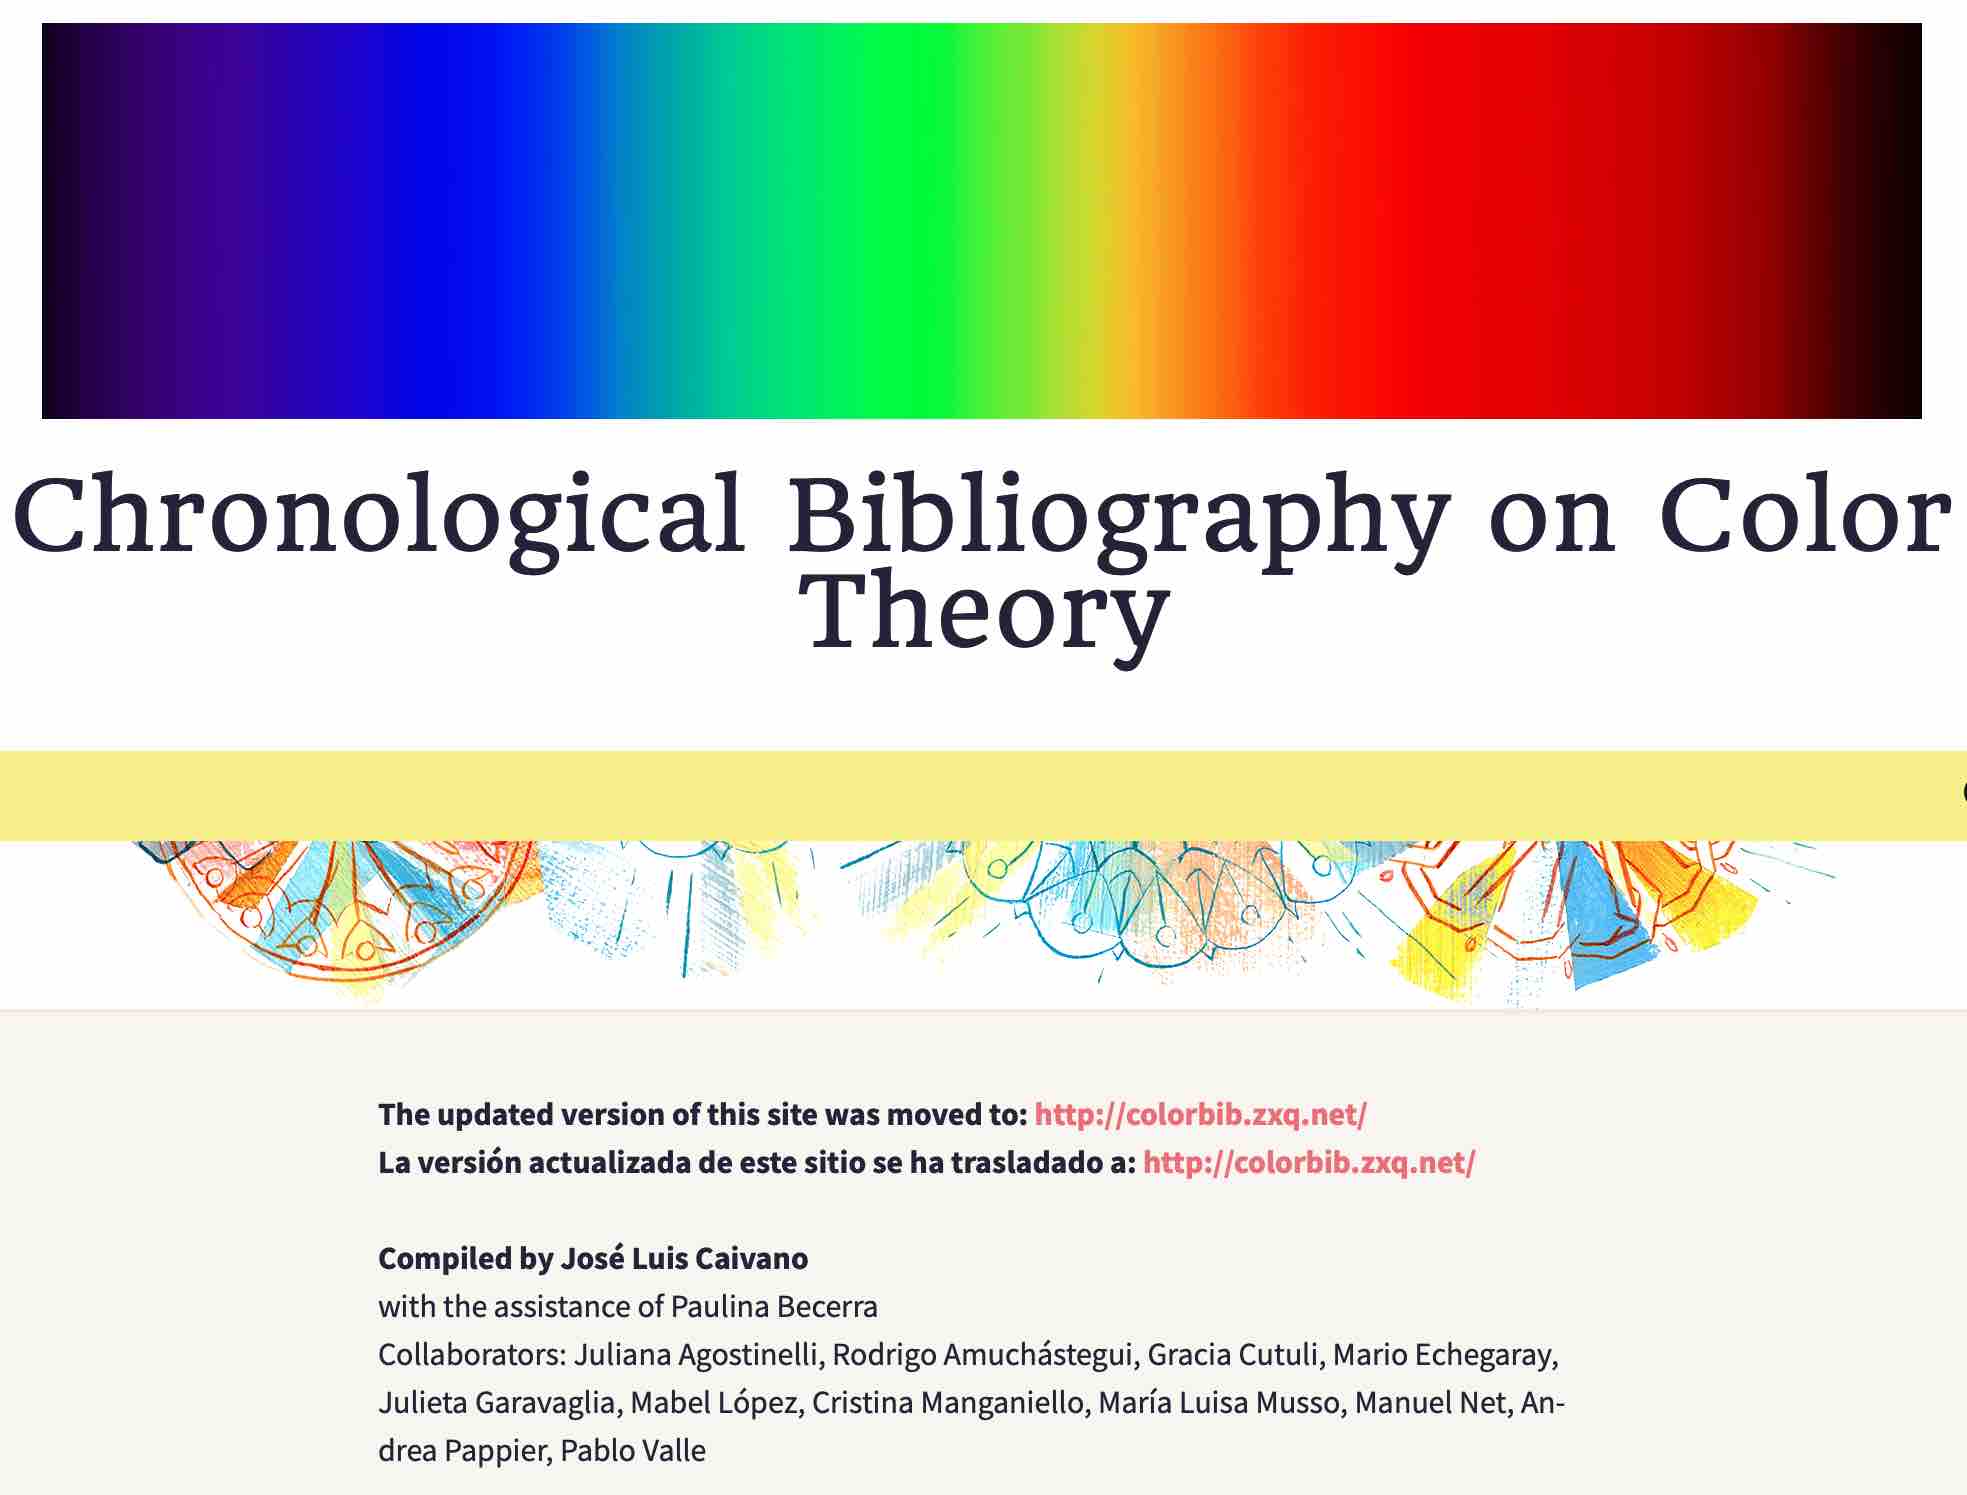 Chronological Bibliography on the Theory of Colour